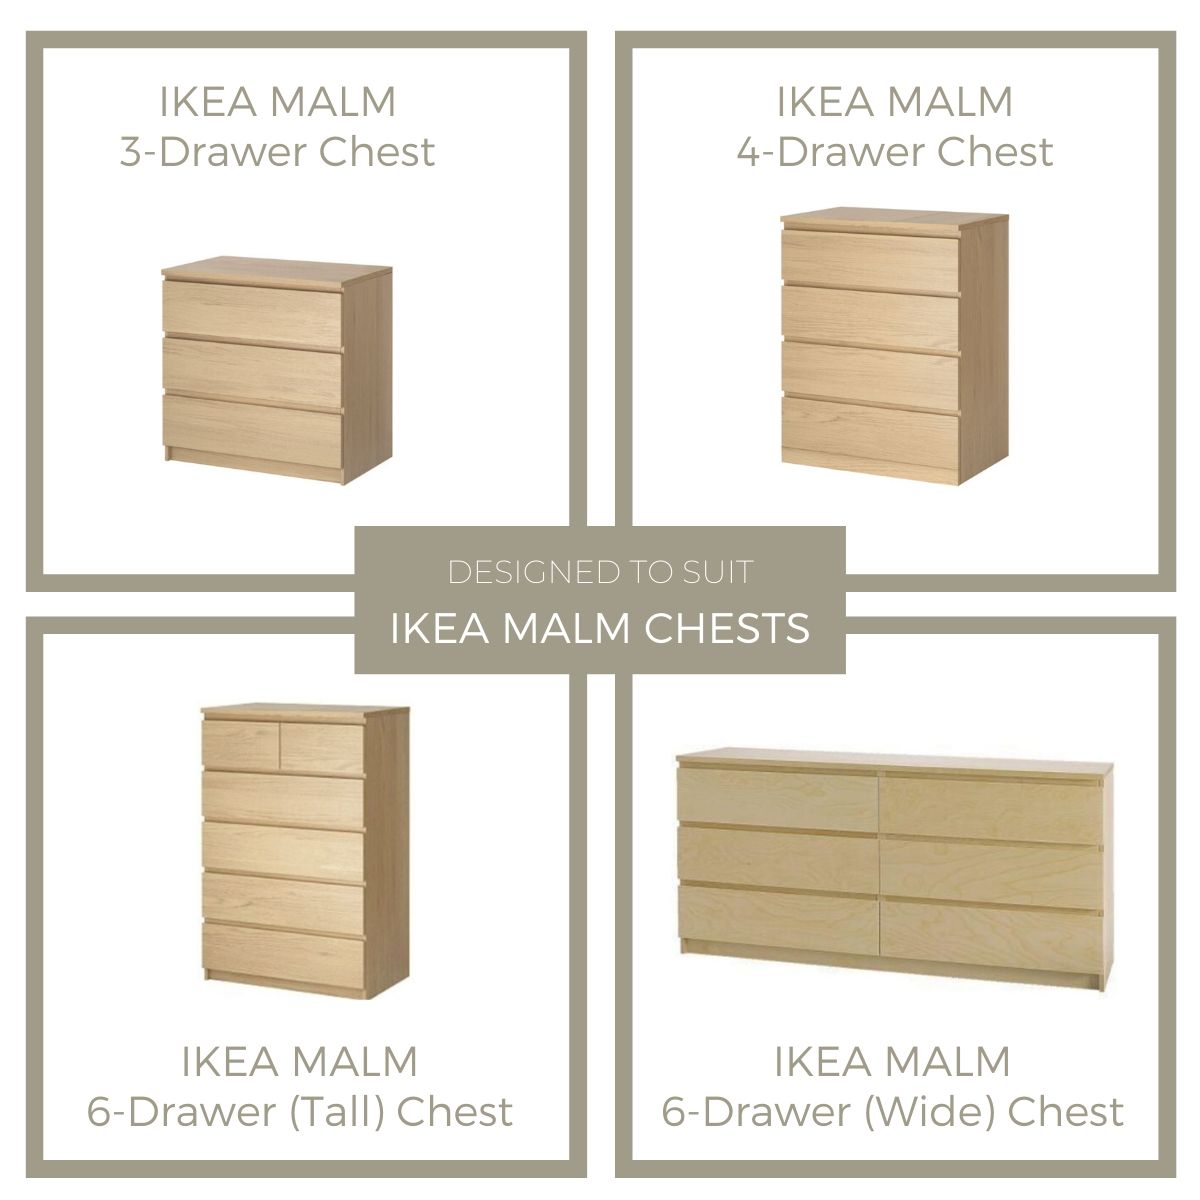 Styl-Panel Kit: #1131 to suit IKEA Malm 3 or 4 or 6 drawer chest - Lux Hax